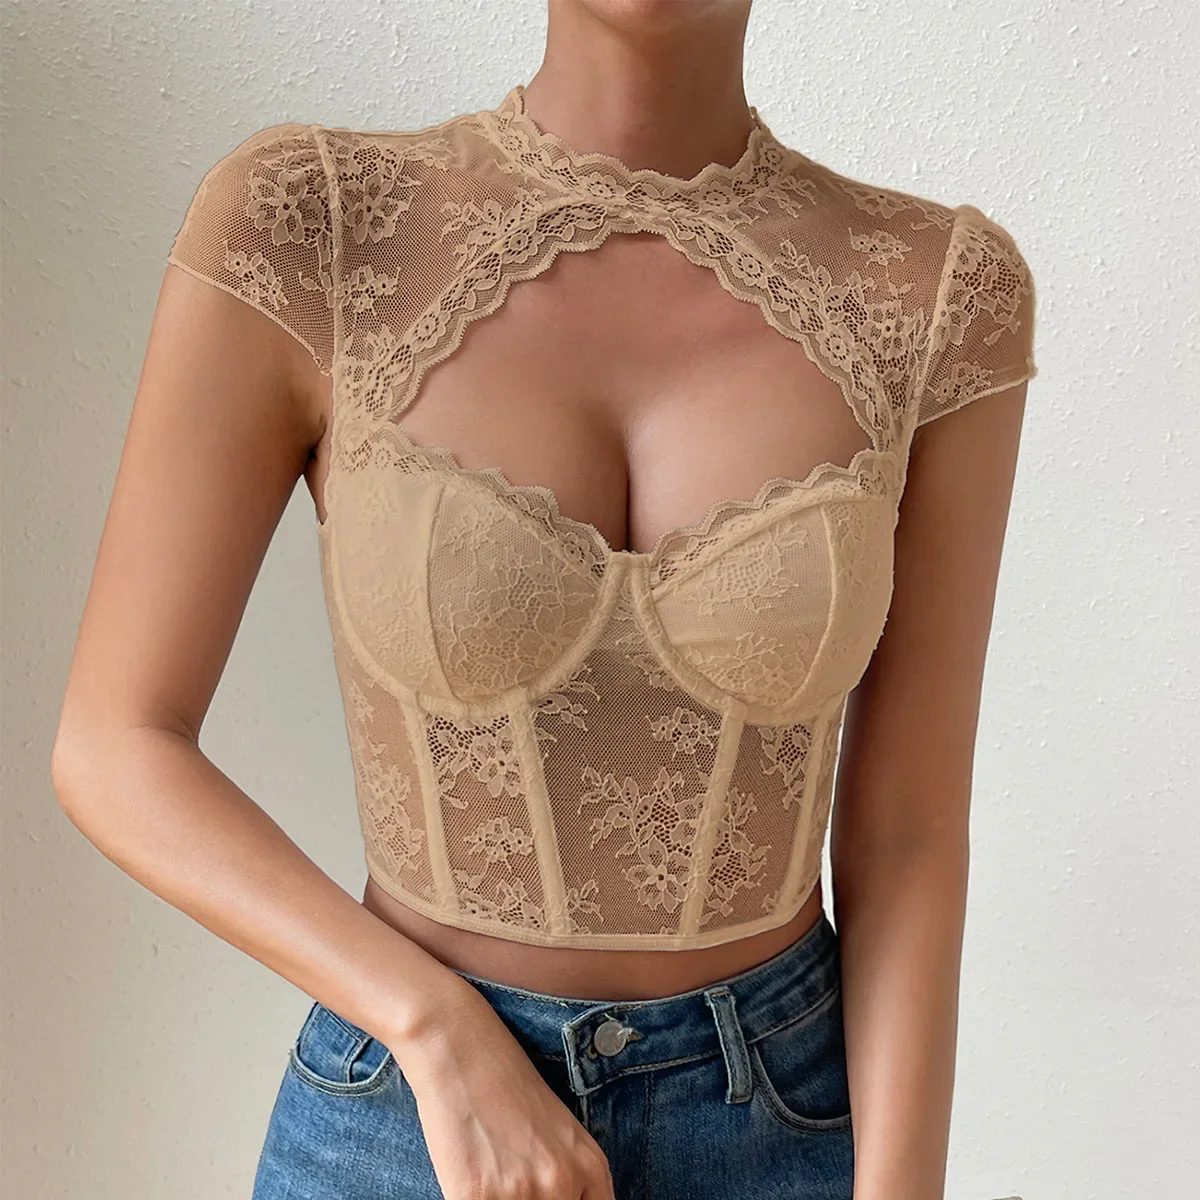 

Street Hipsters Short Sleeve Lace Teddy with Hollow Out Details Navel-Baring Cut Bra Top Tube Top Corset Top Bustier